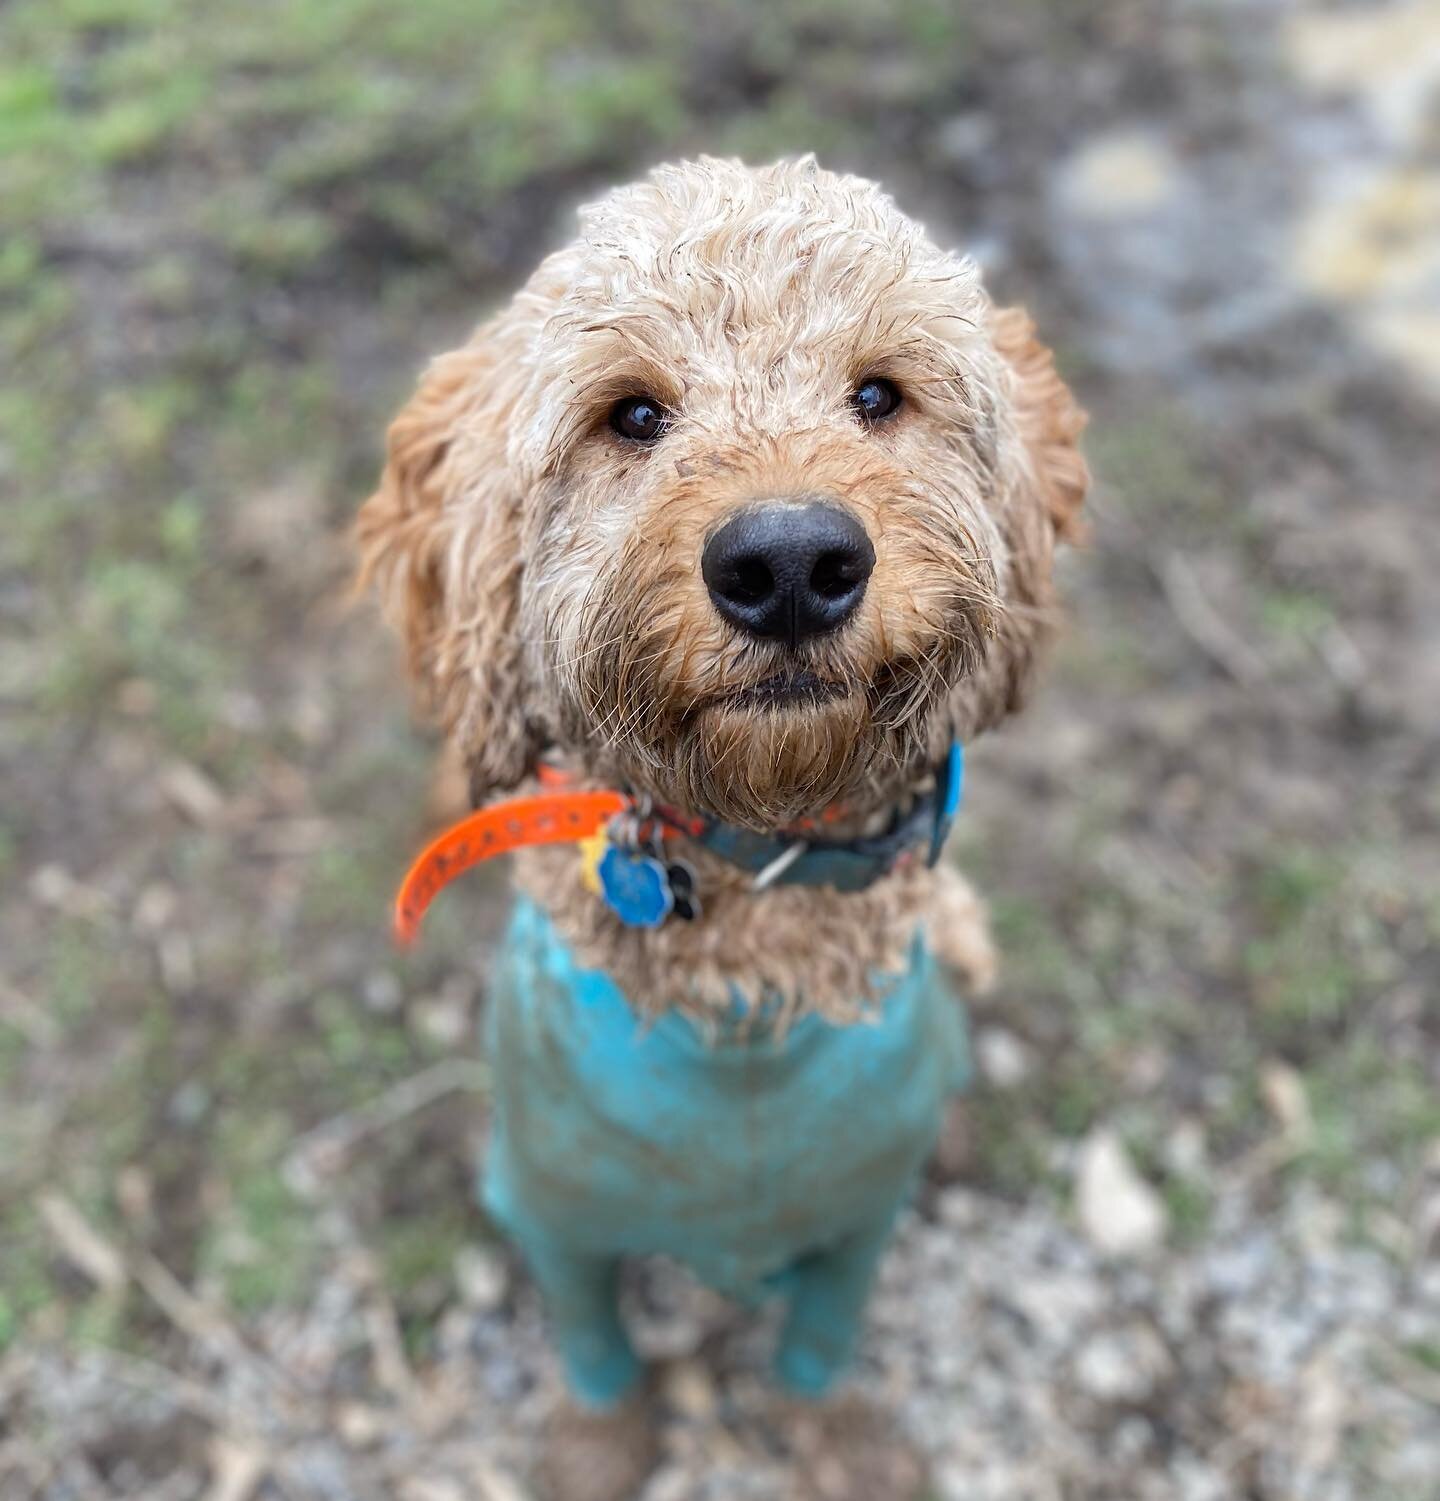 This is Finnegan &lsquo;I love the mud&rsquo; face 🤣 #beafarmdog #farmdogadventures #opbarks

#phillydogtraining #dogsofphilly #phillydog #doodlegram #doodlesofphilly #doodledailyposts #happydoodle